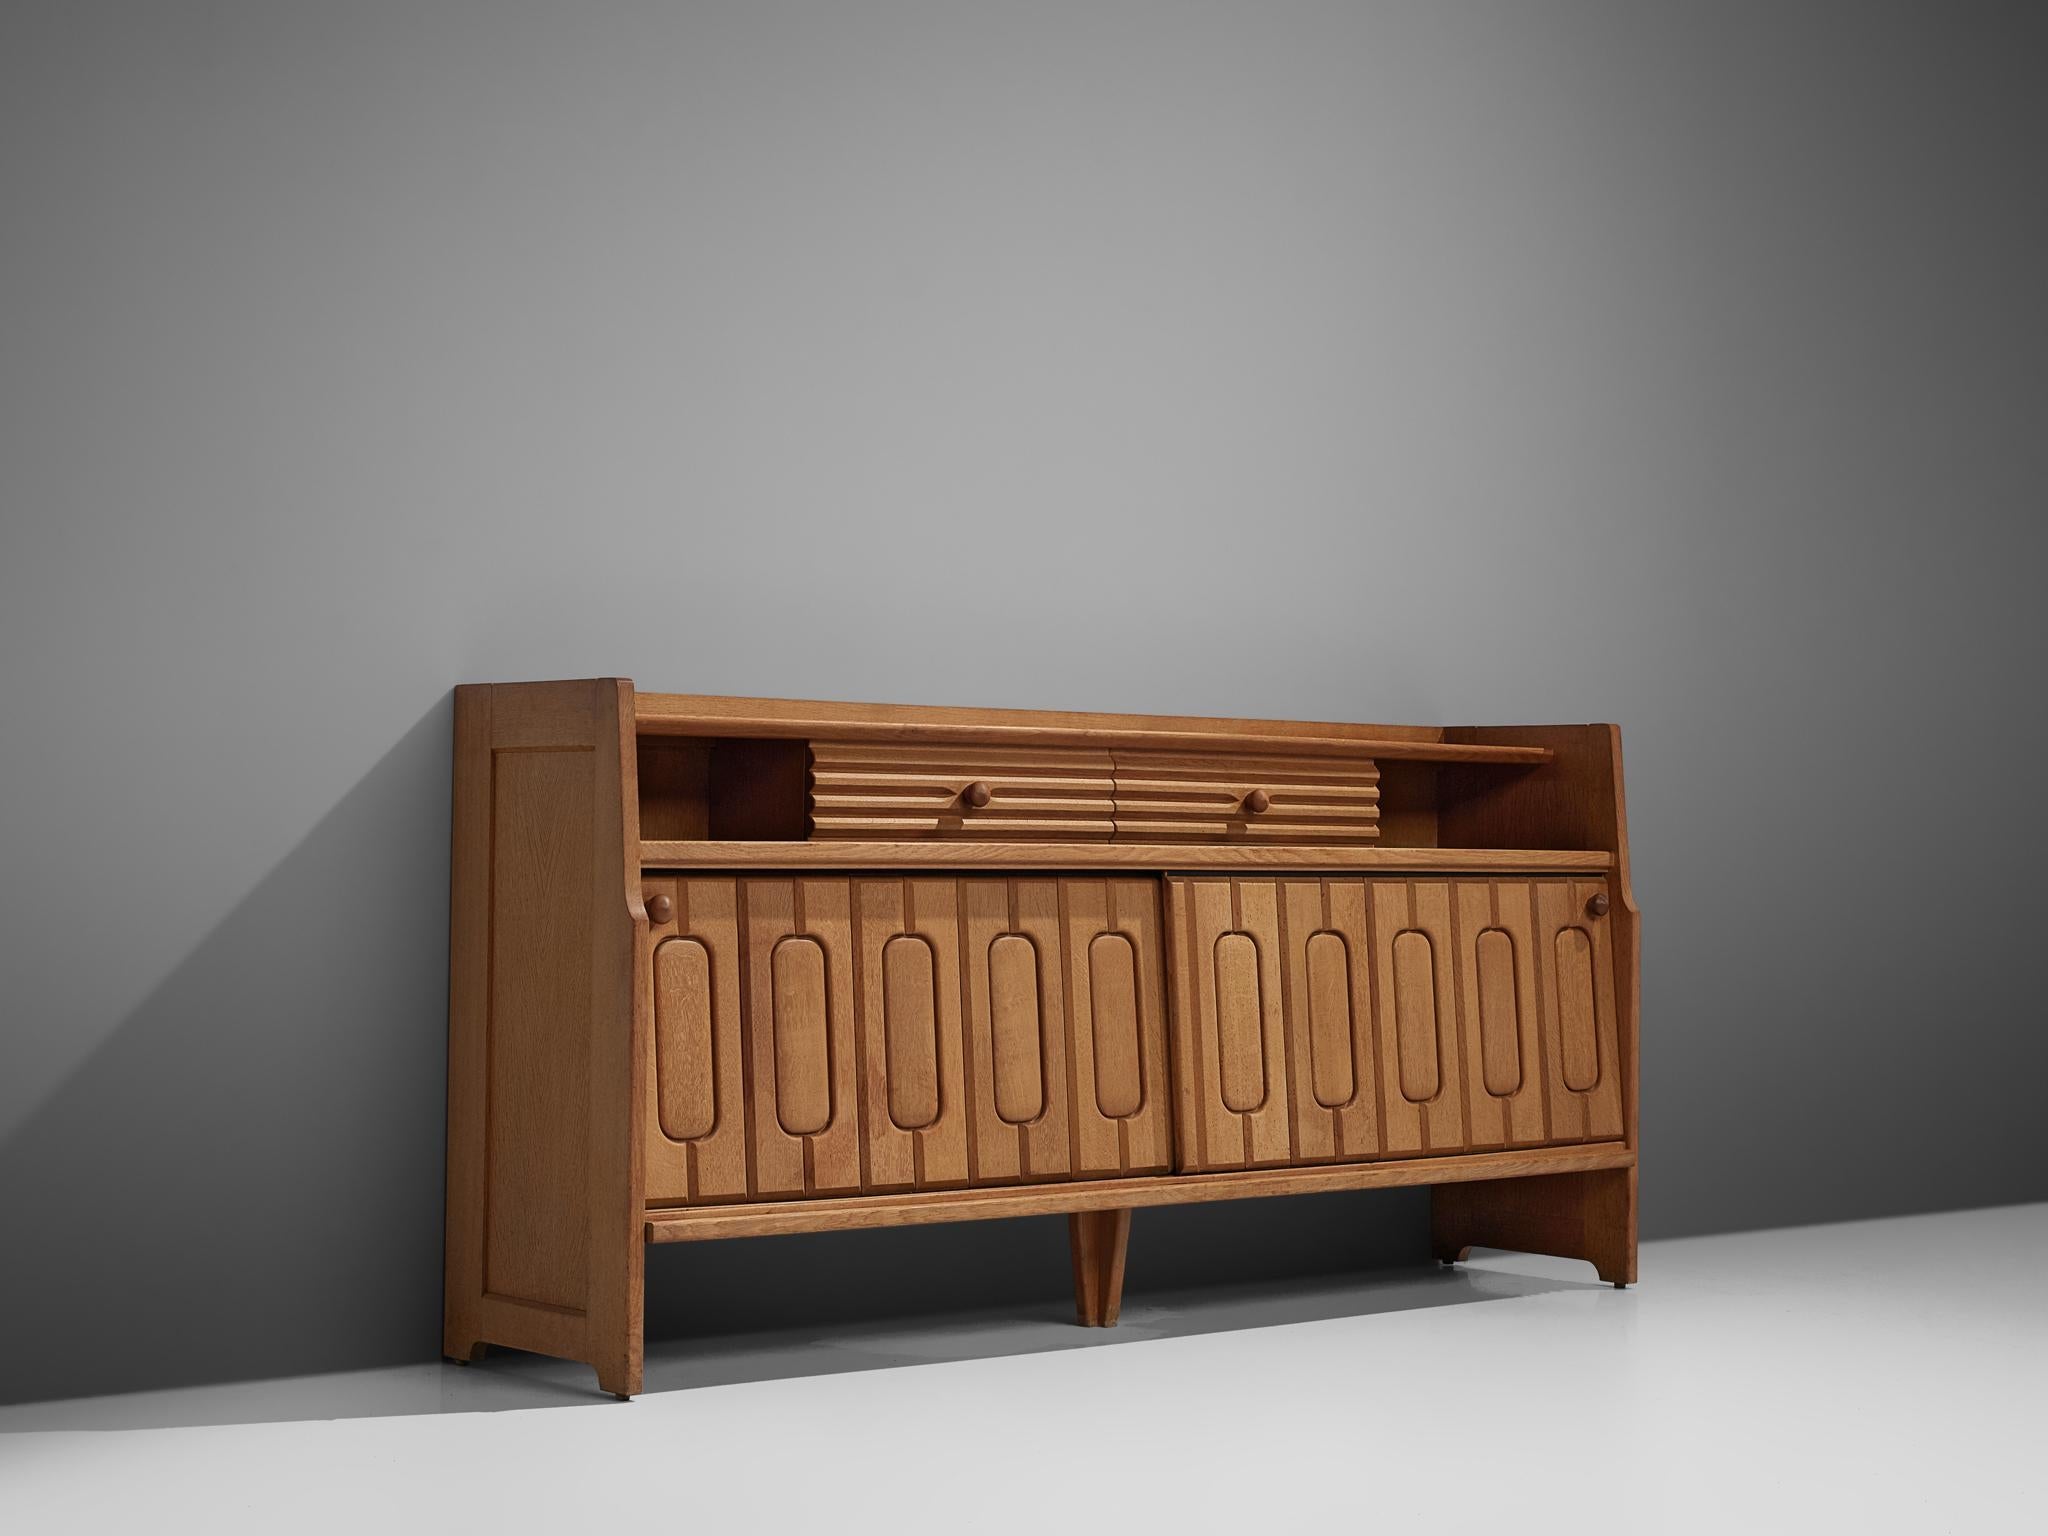 Guillerme & Chambron Sideboard in Oak and Ceramic Tiles